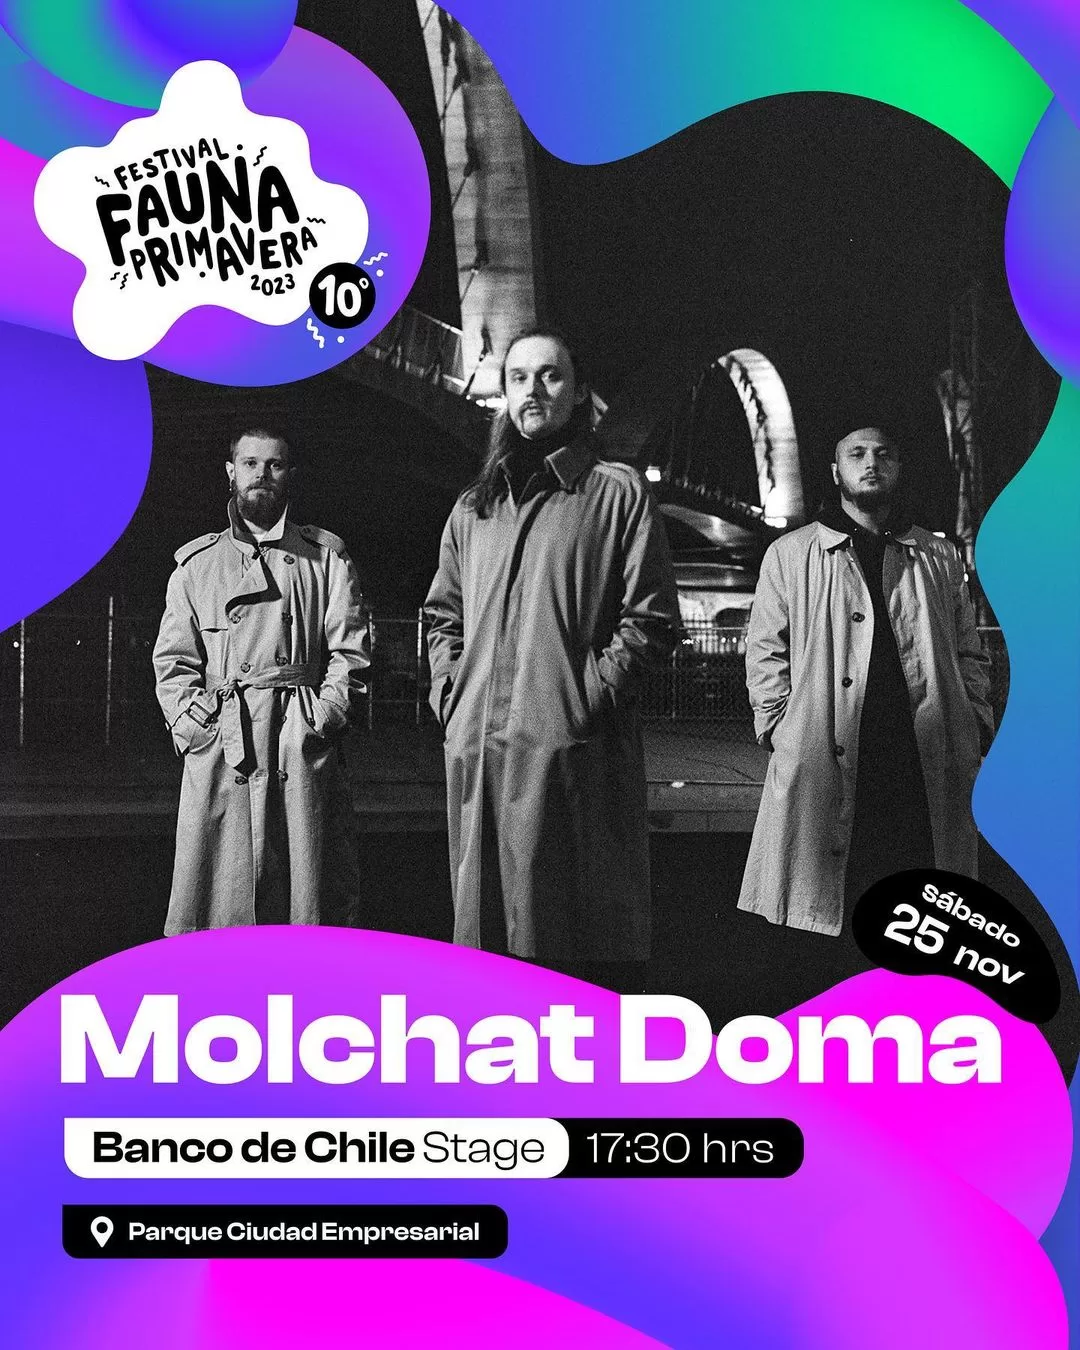 Molchat Doma